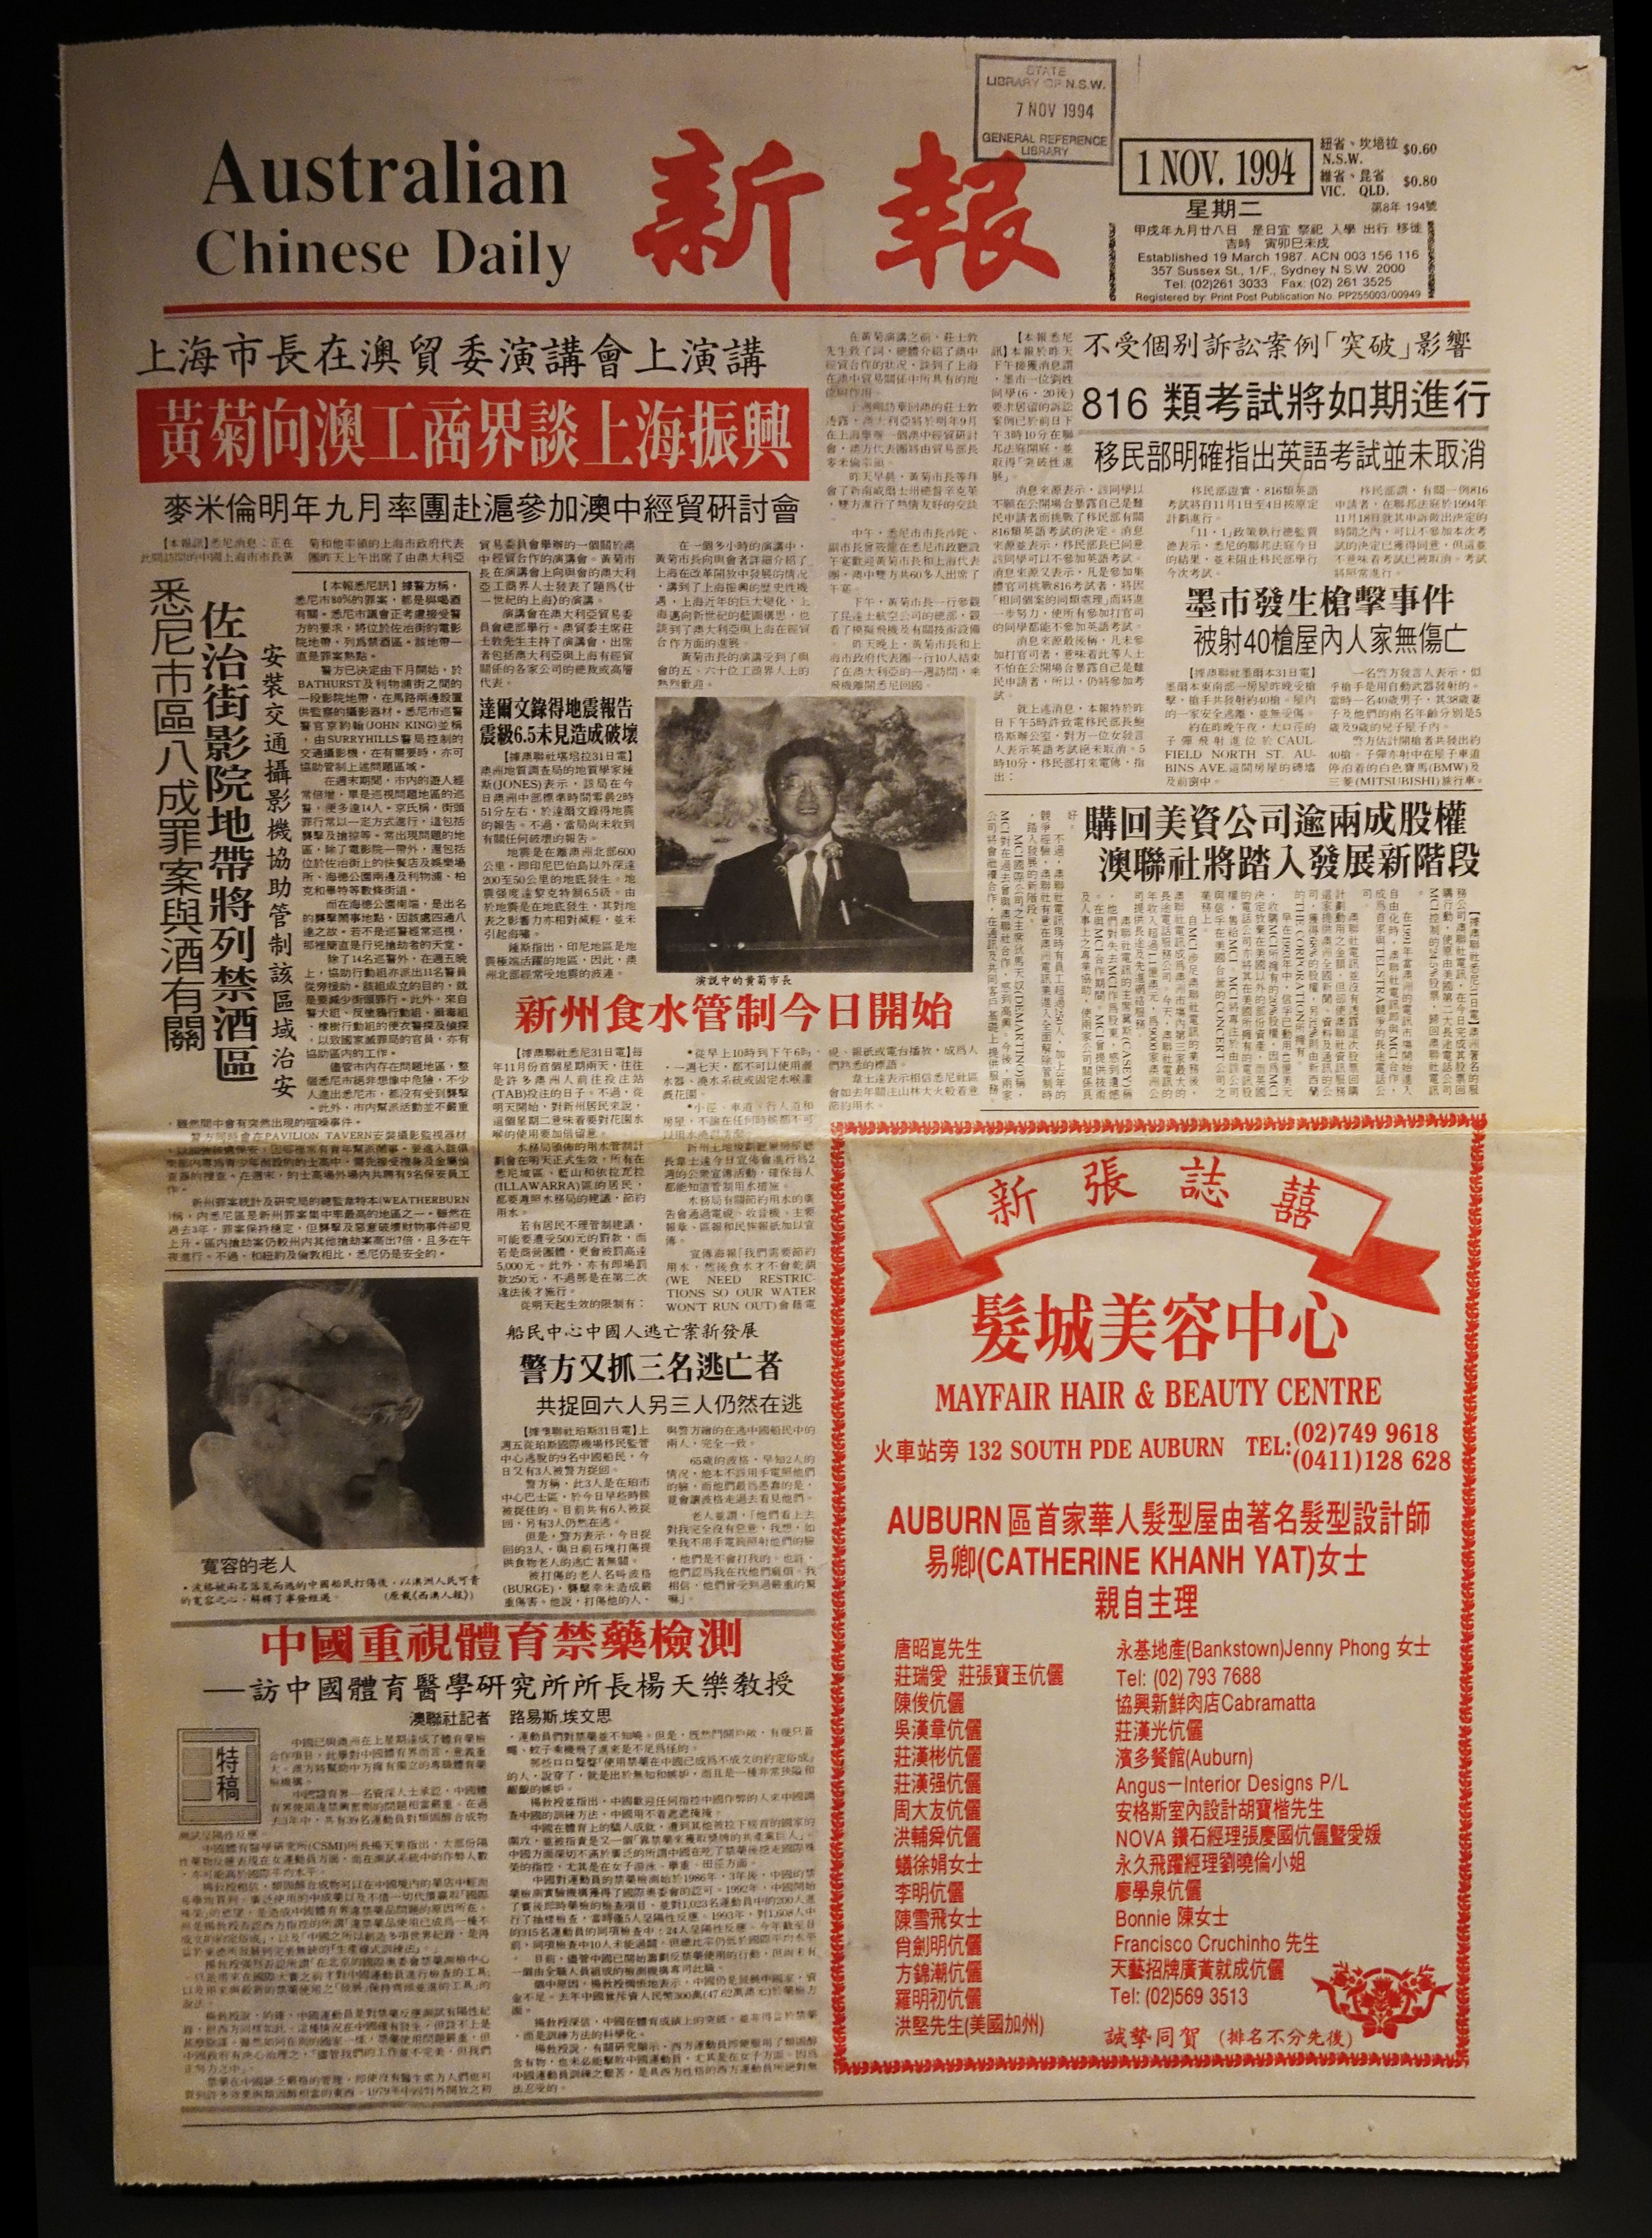 Cover of an editing of the Australian Chinese Daily